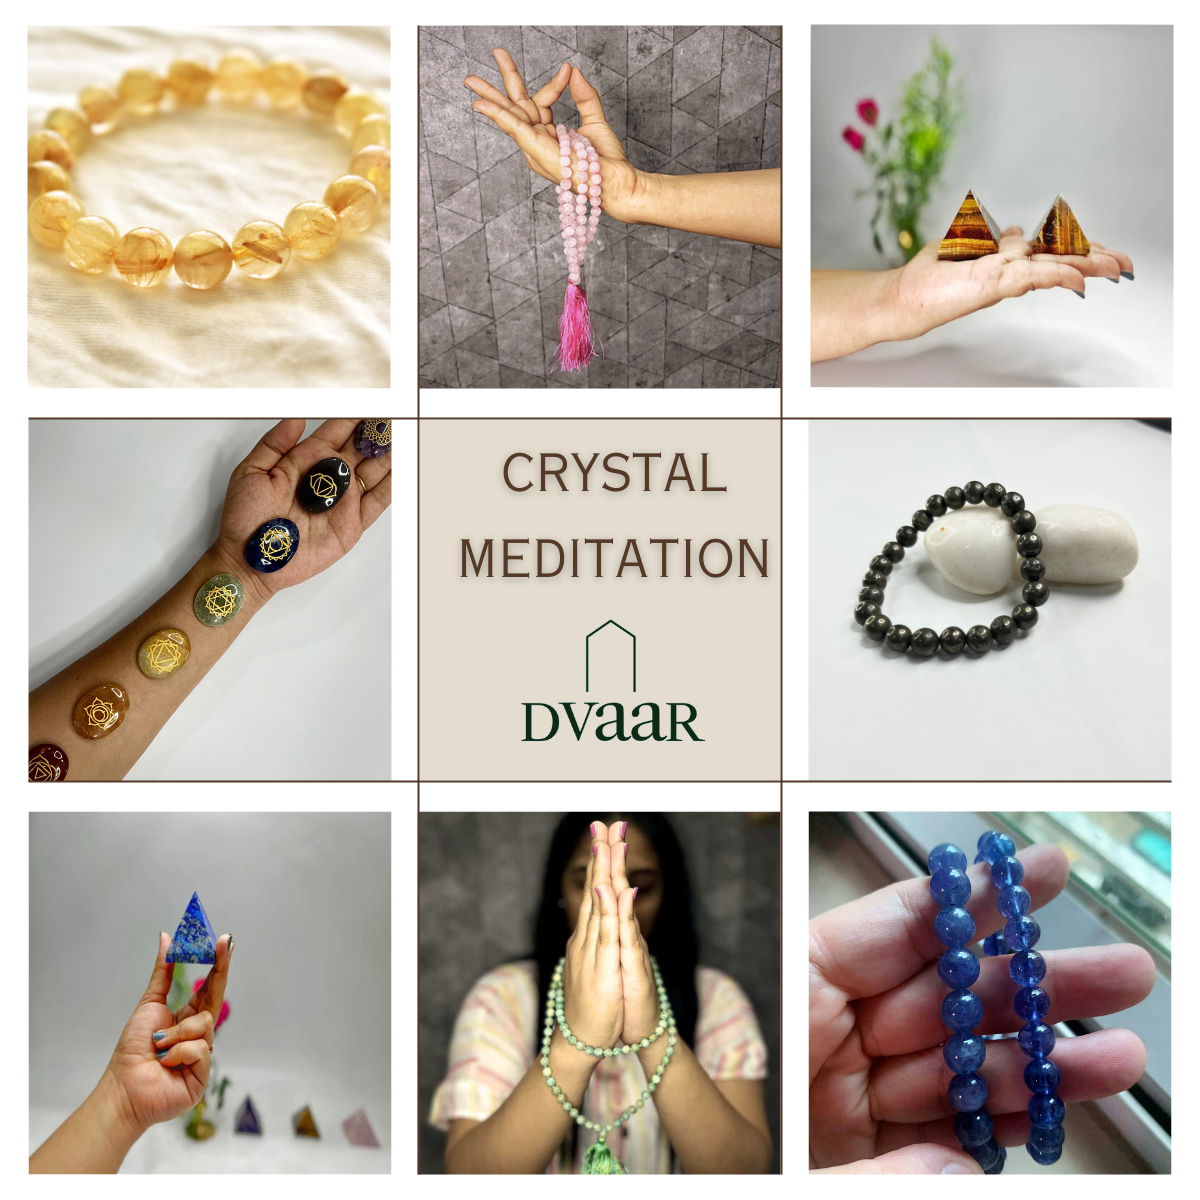 What is Crystal meditation?